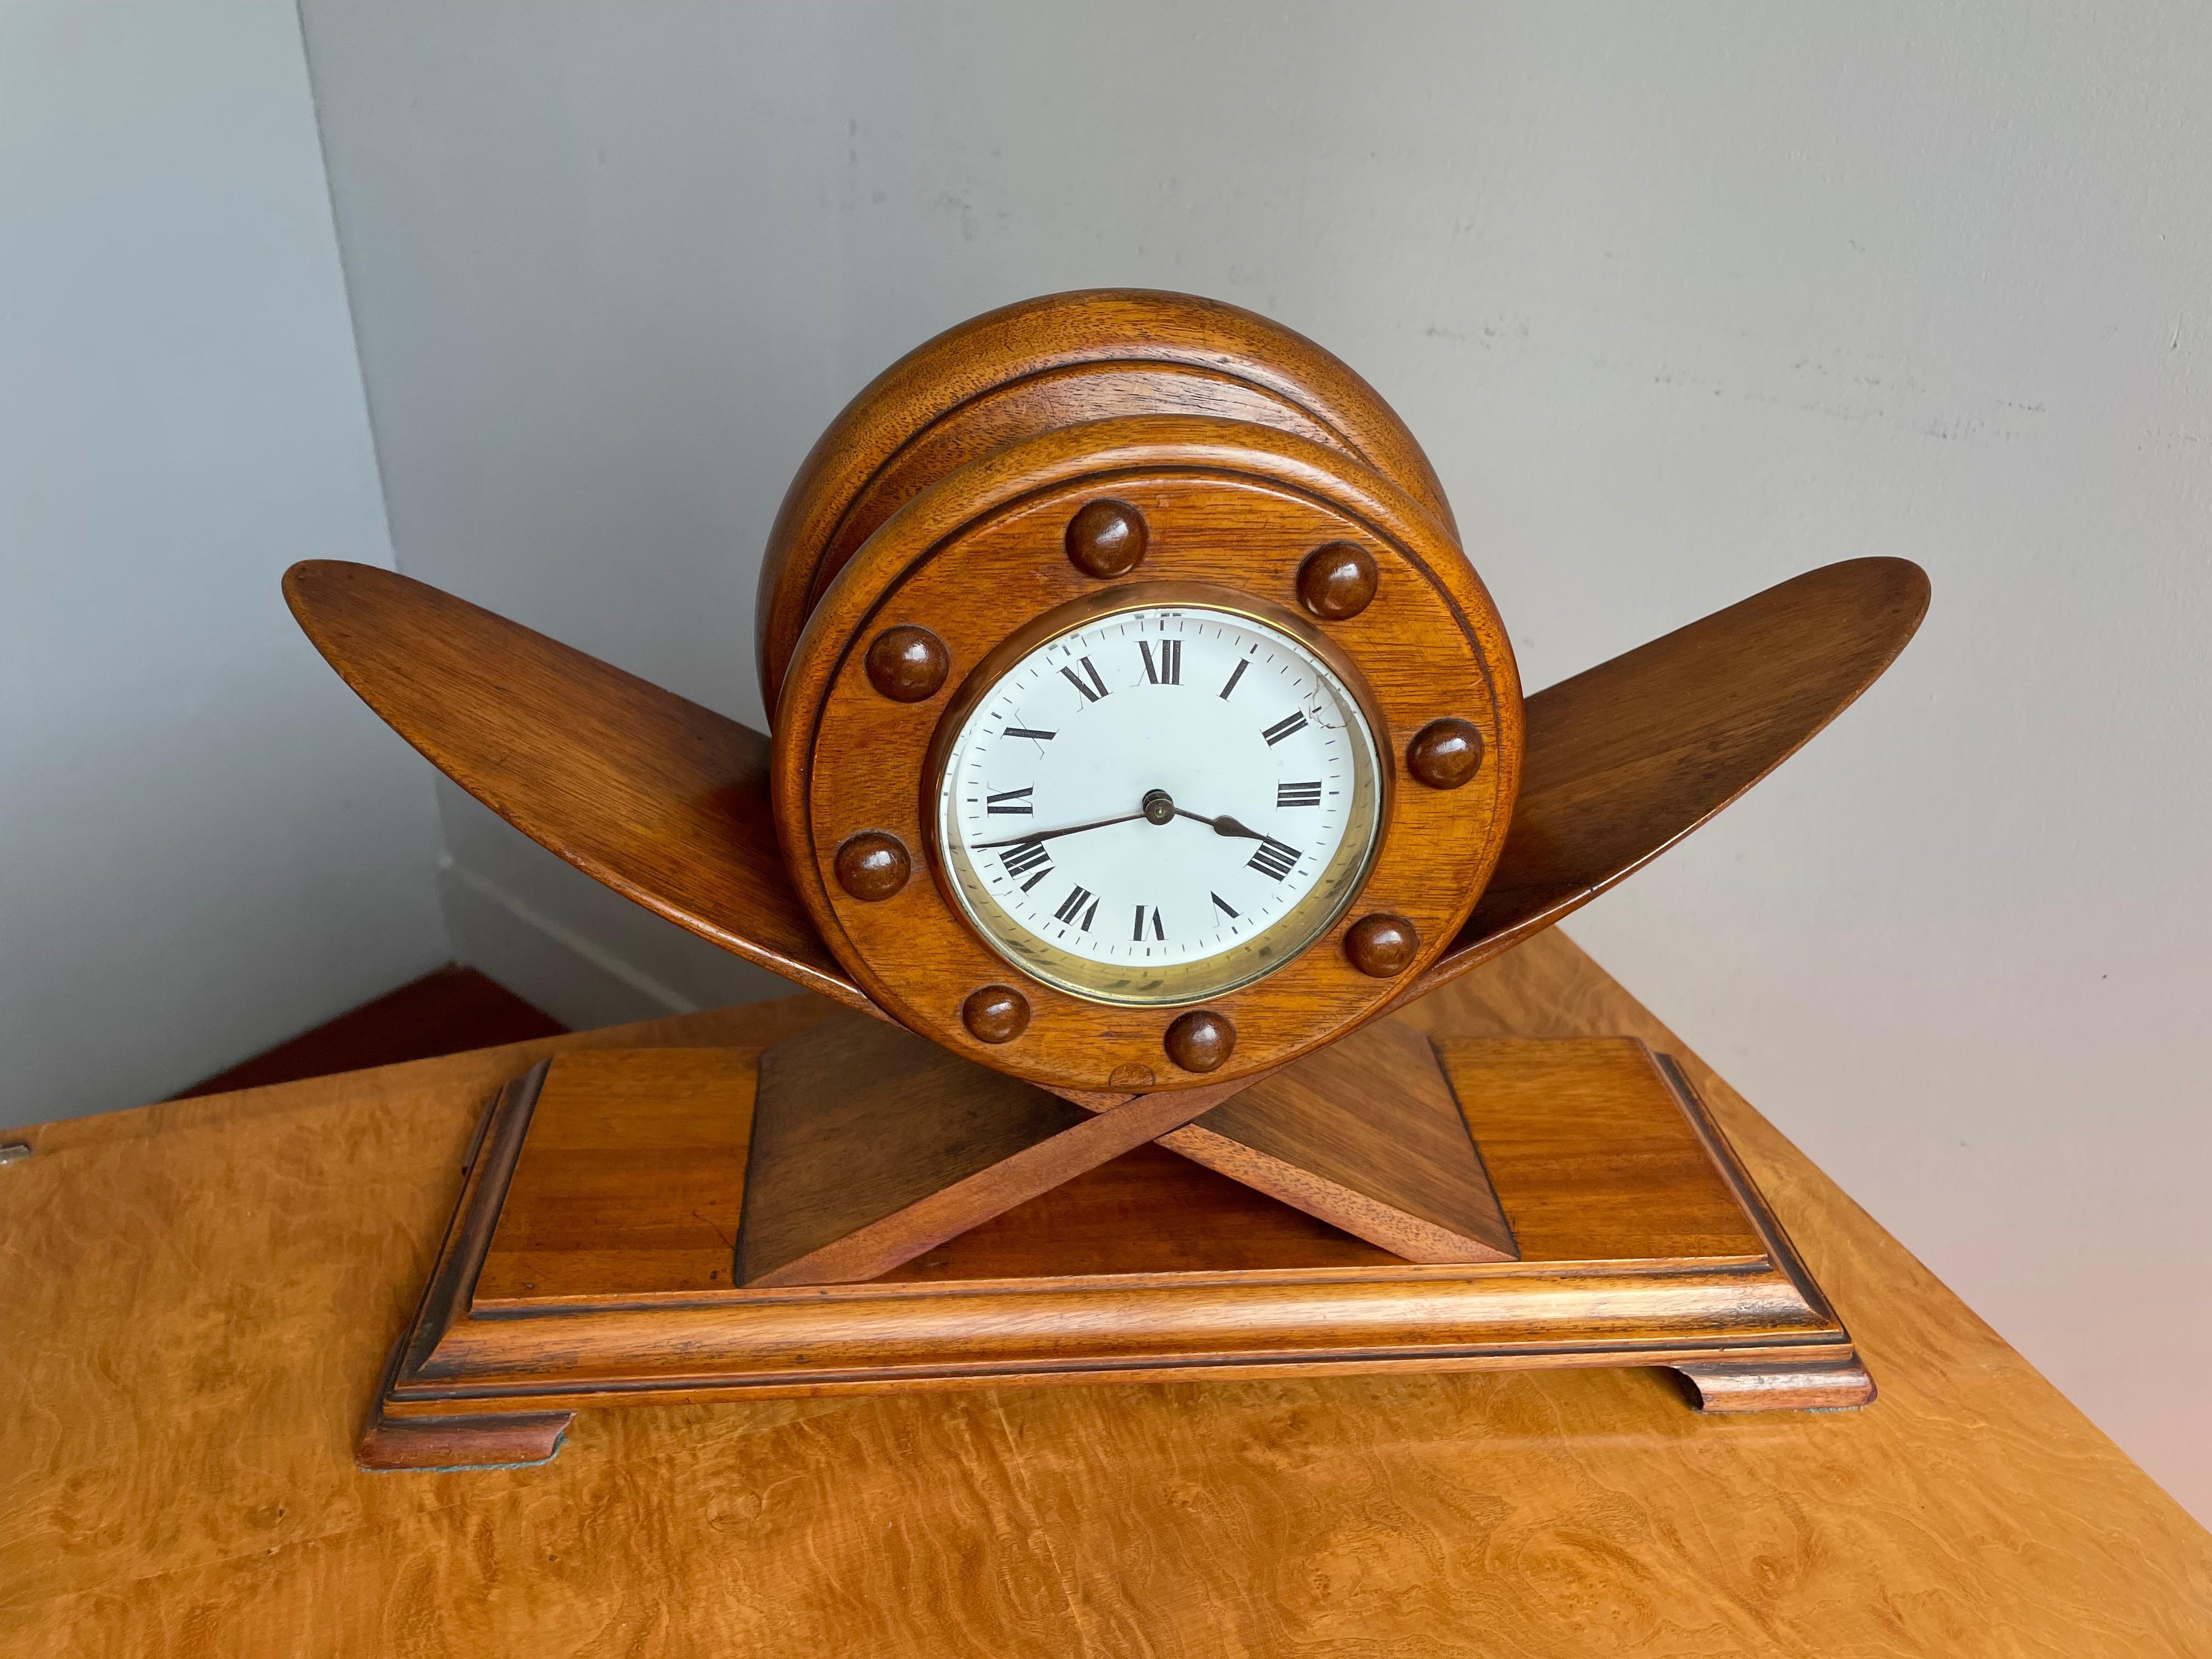 Beautifully handcrafted and practical size, airplane theme table clock.

Over the years we have sold a number of striking (no pun intended) clocks, but never one as decorative and cool looking as this one. Aviation has made the world significantly